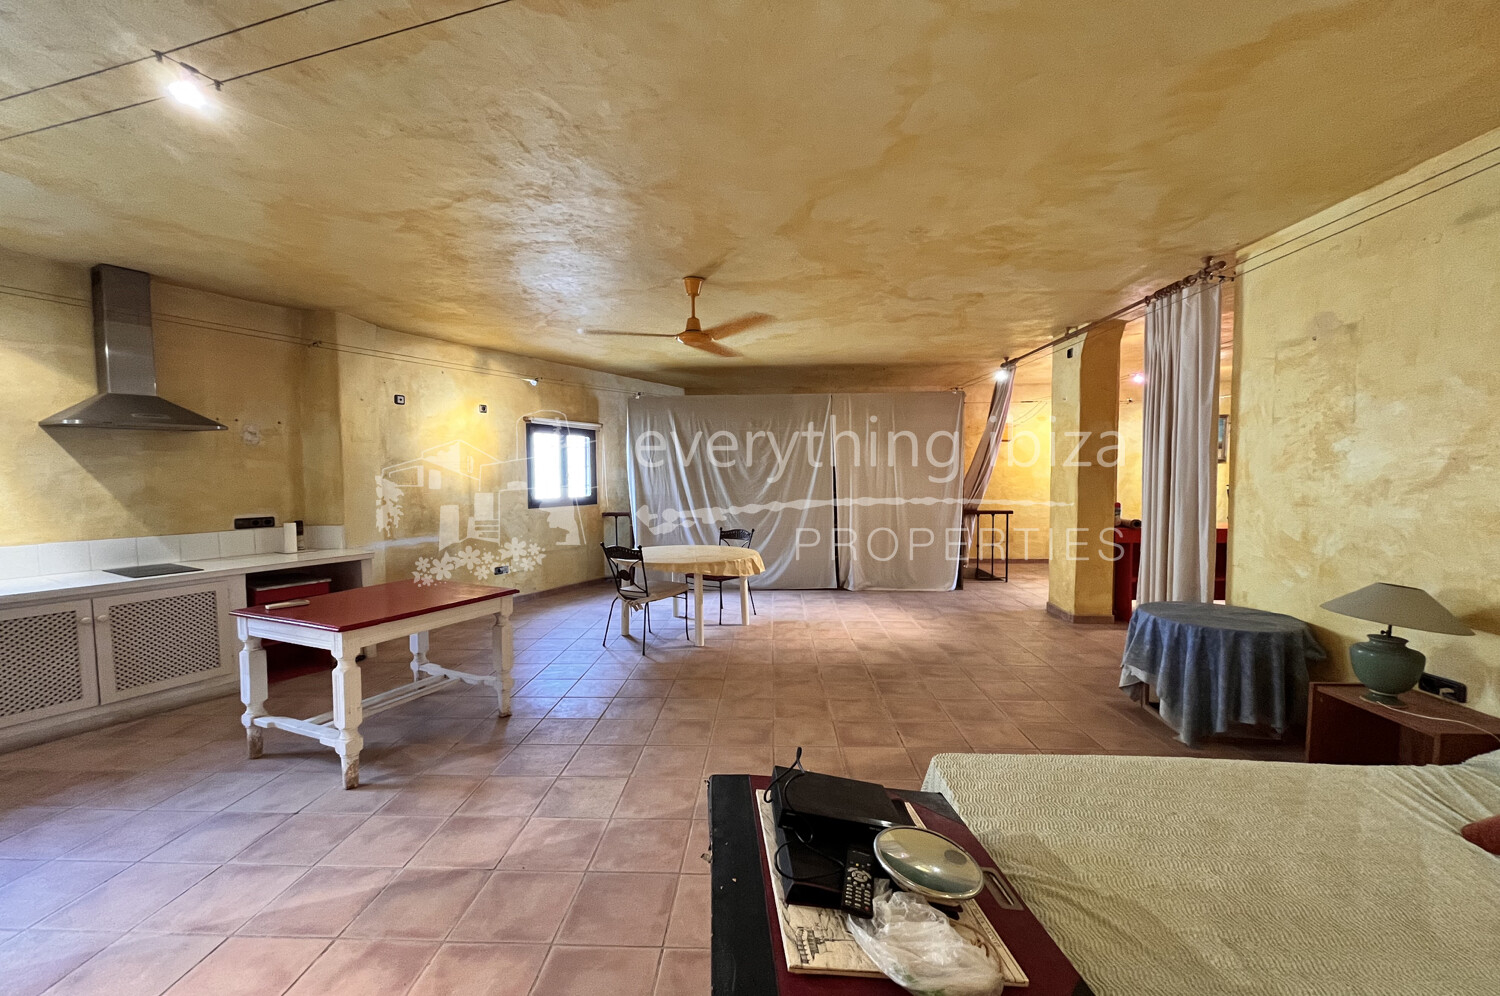 https://www.everythingibiza.com/properties/versatile-commer…of-san-jose-1640/,ref. 6, for sale in Ibiza by everything ibiza Properties